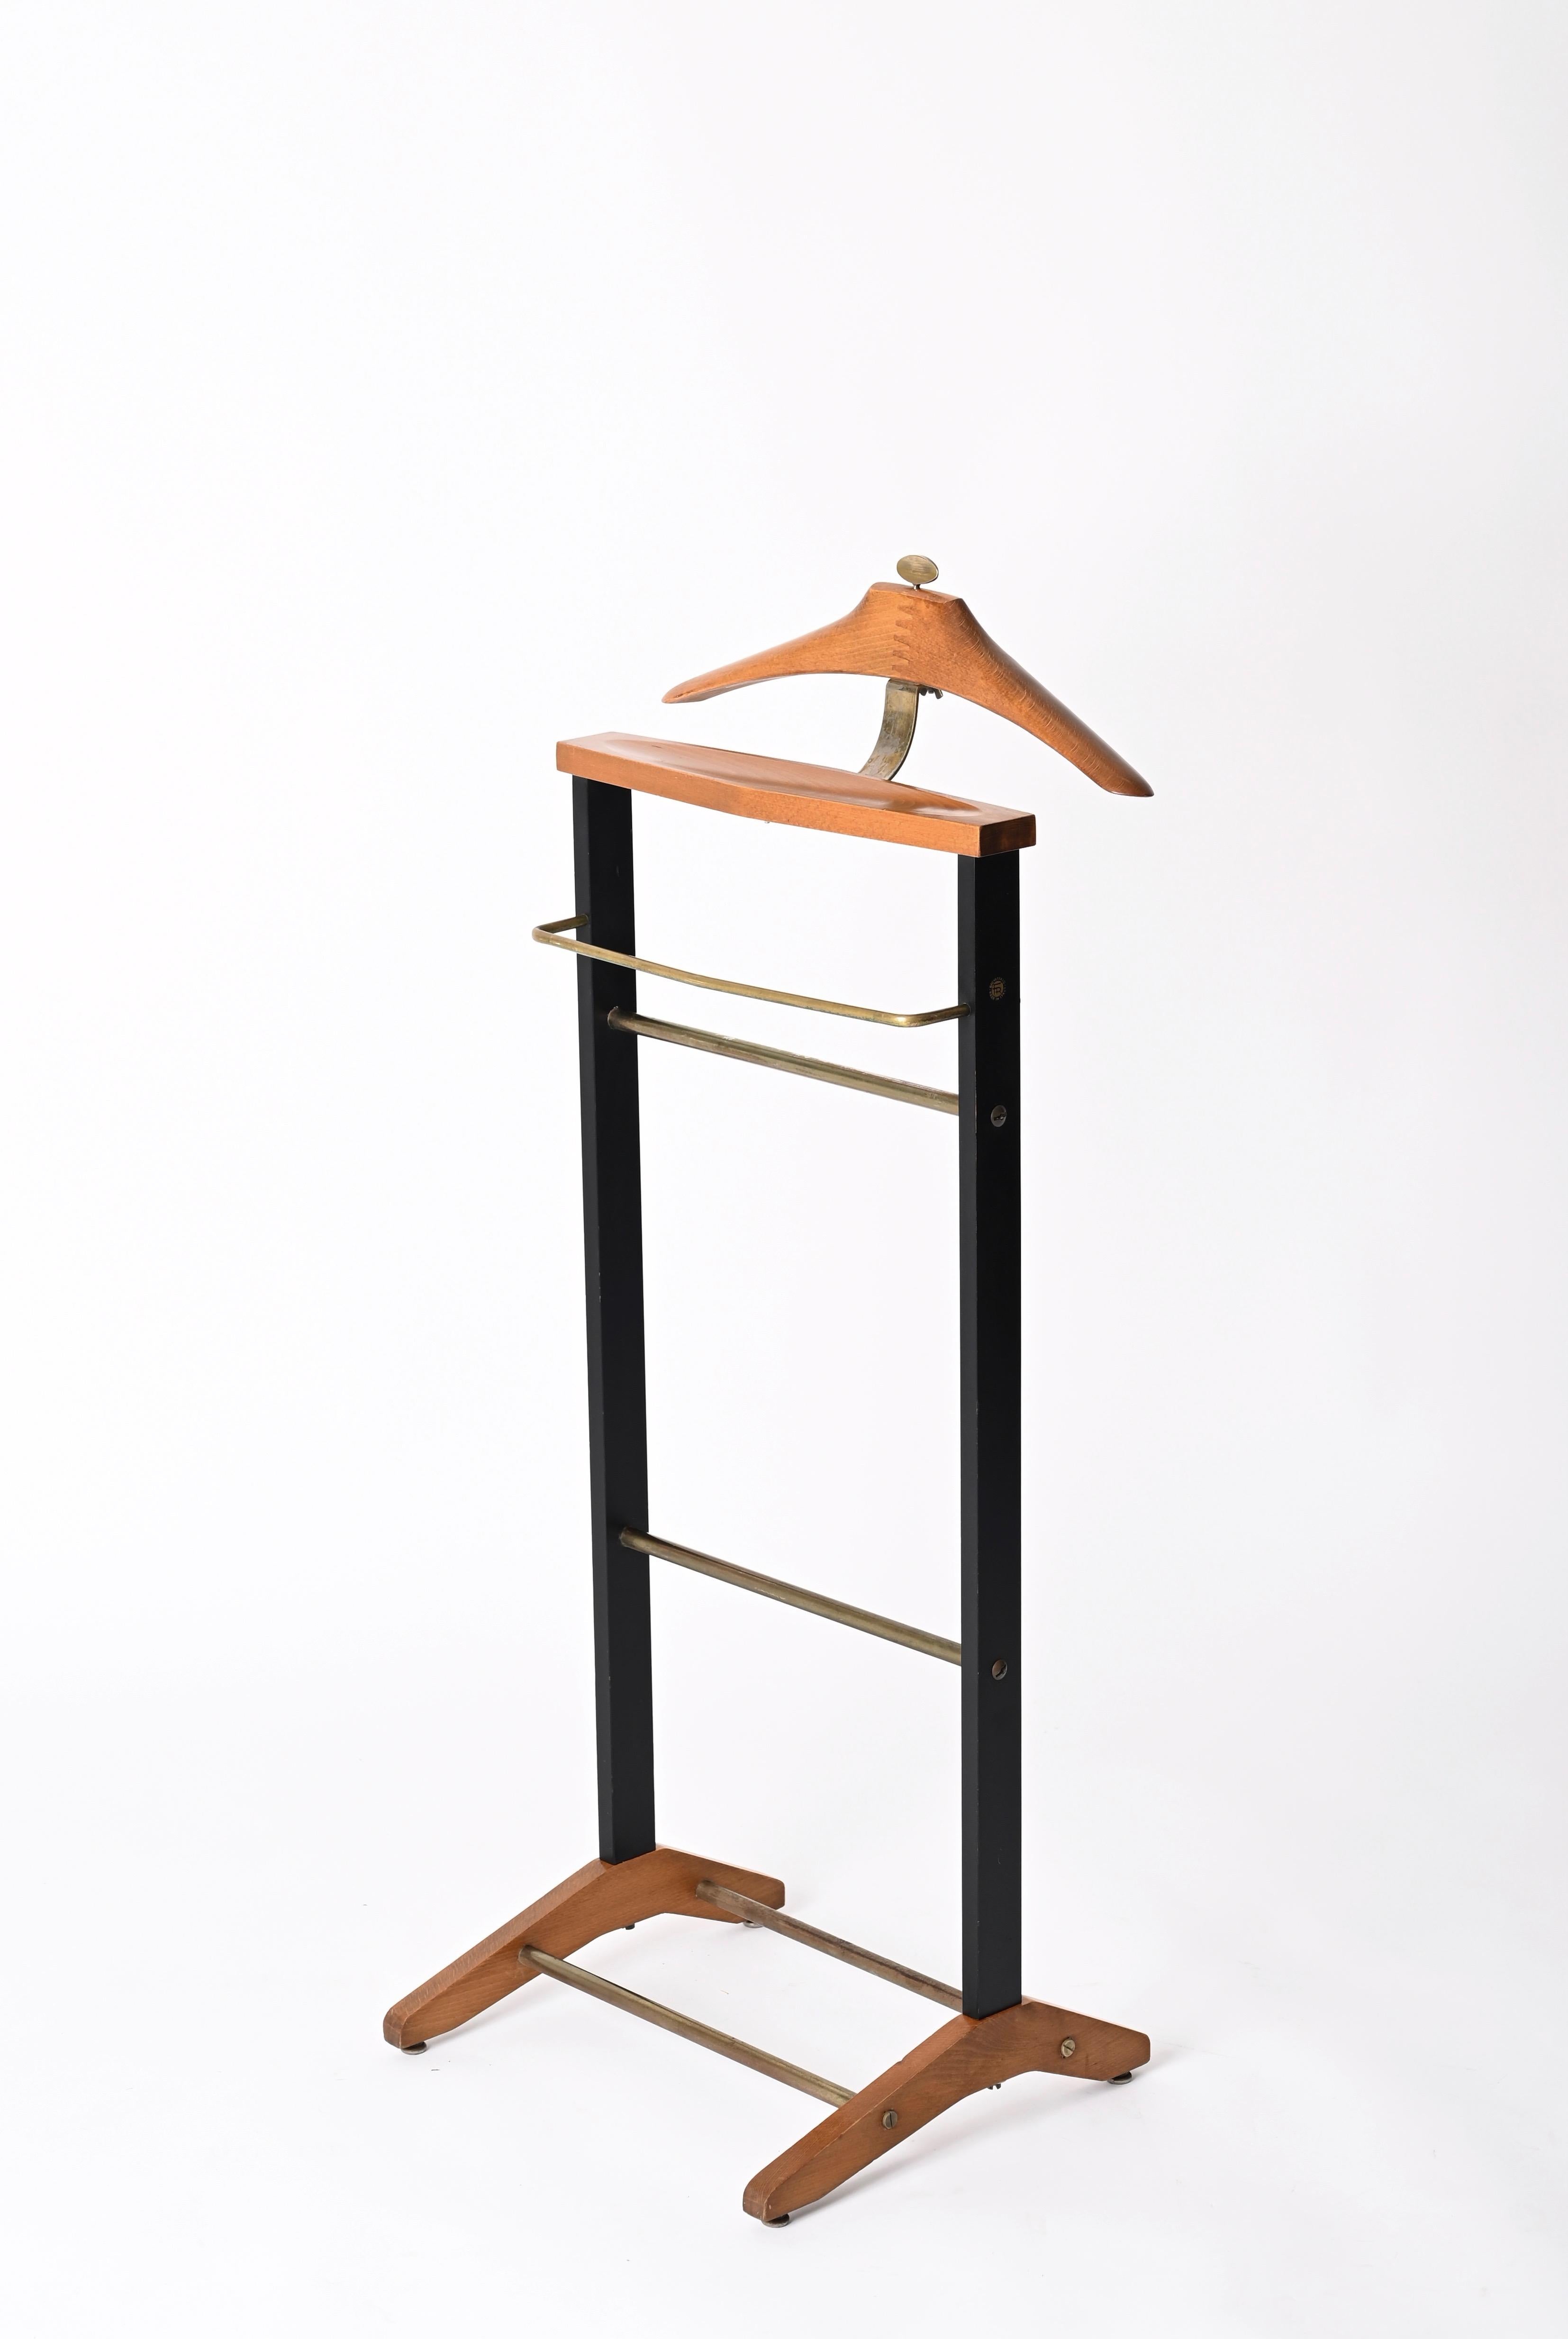 20th Century Ico Parisi Valet Beech and Brass Coat Stand for Fratelli Reguitti, Italy 1960s For Sale